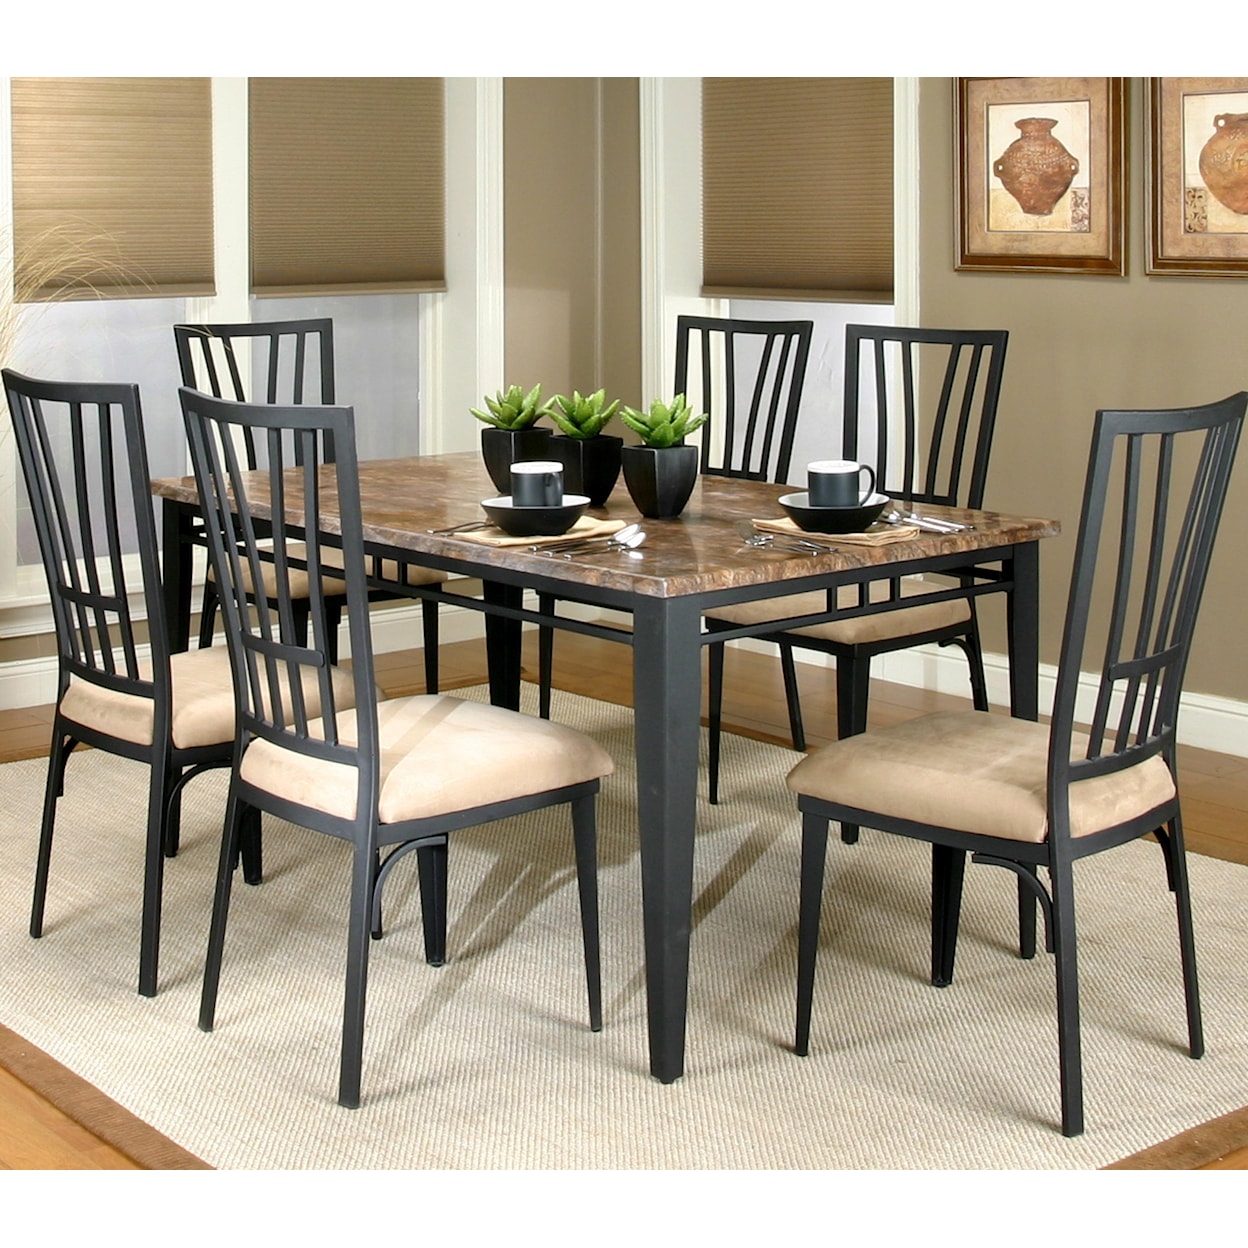 Cramco, Inc Cramco Trading Company - Lingo Table and Chair 7 Piece Set